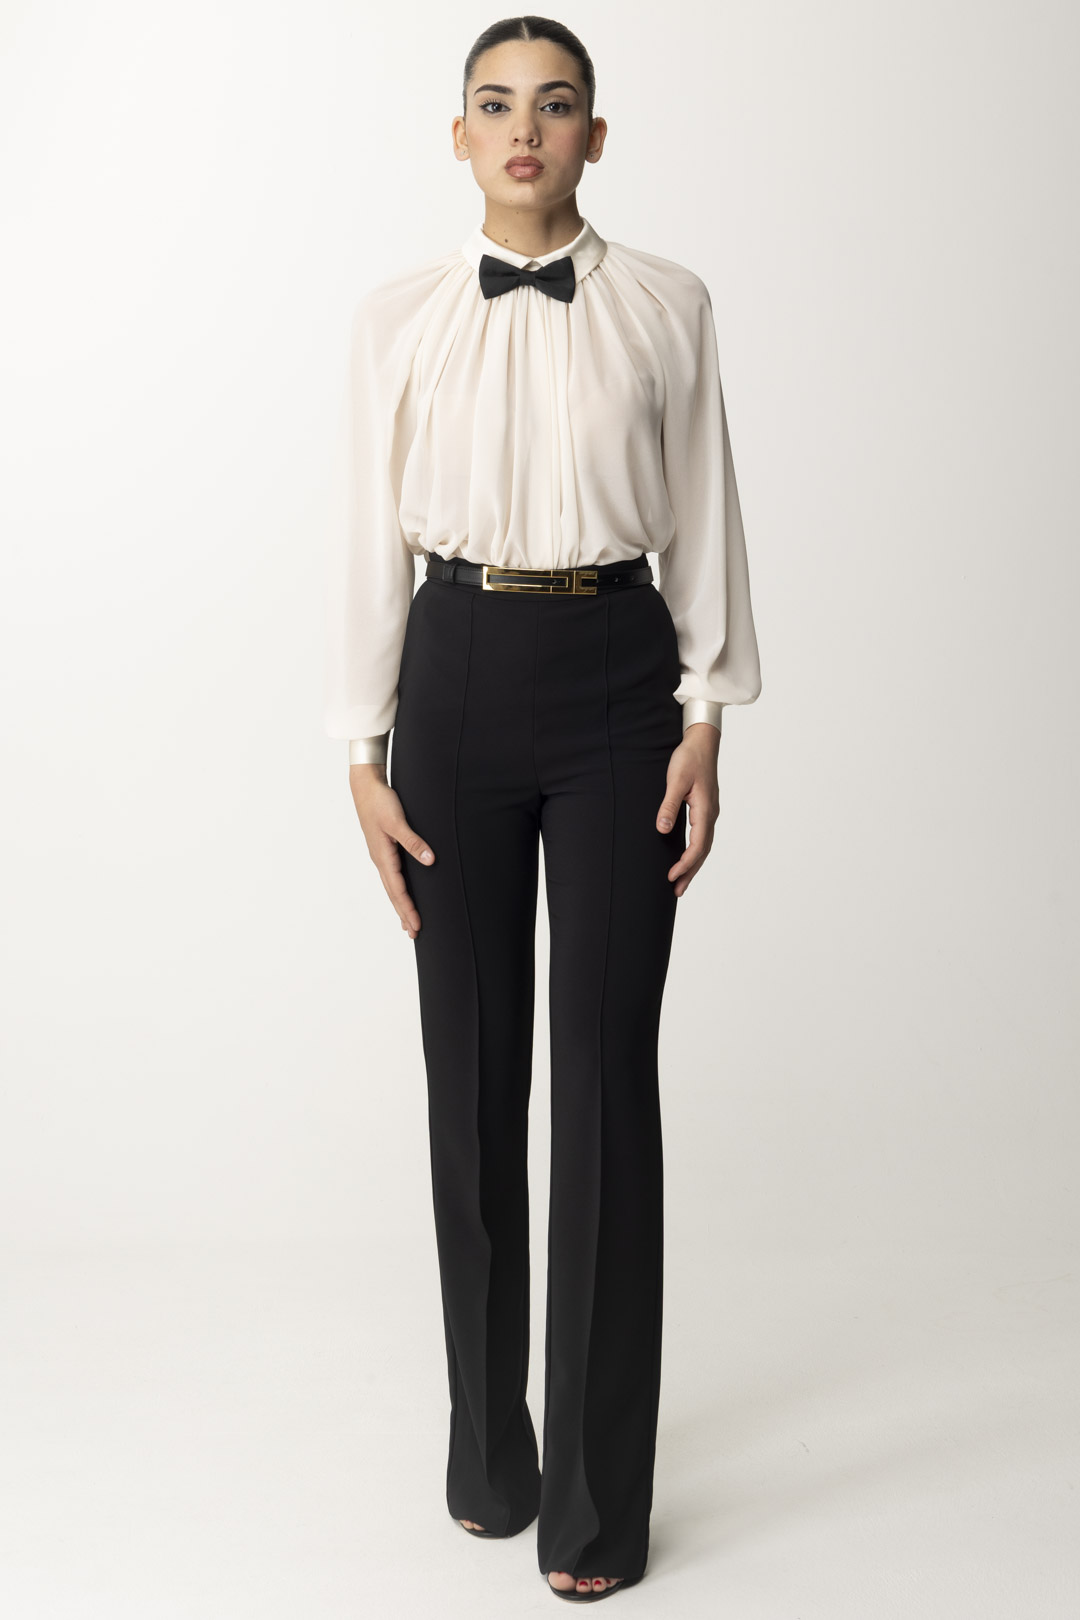 Preview: Elisabetta Franchi Blouse with bow tie Burro